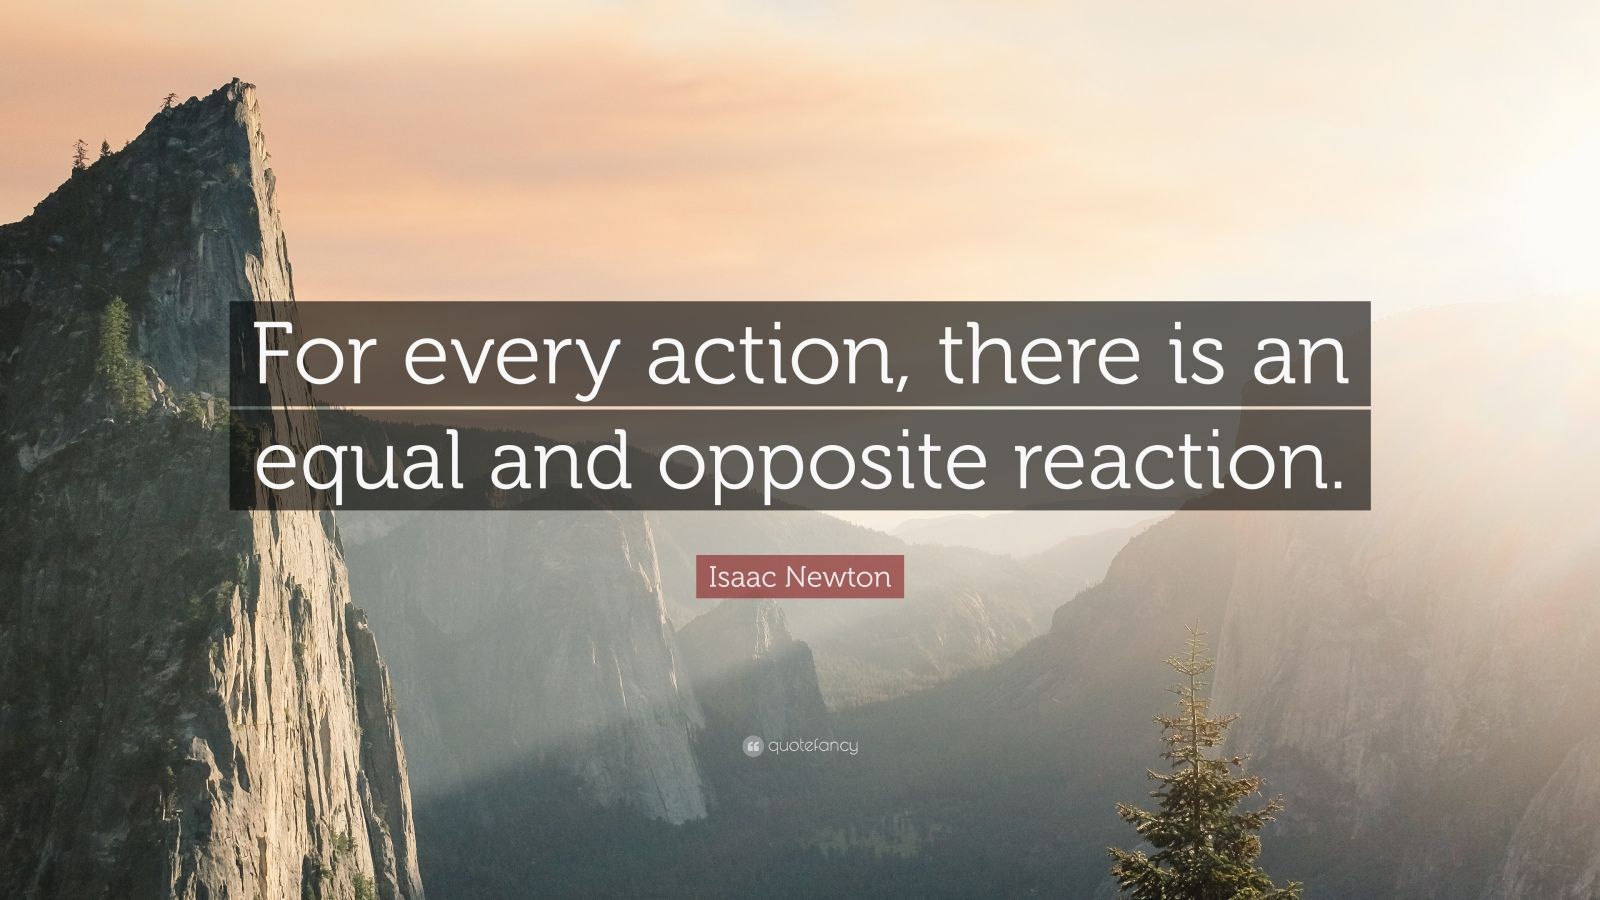 every action has an equal and opposite reaction